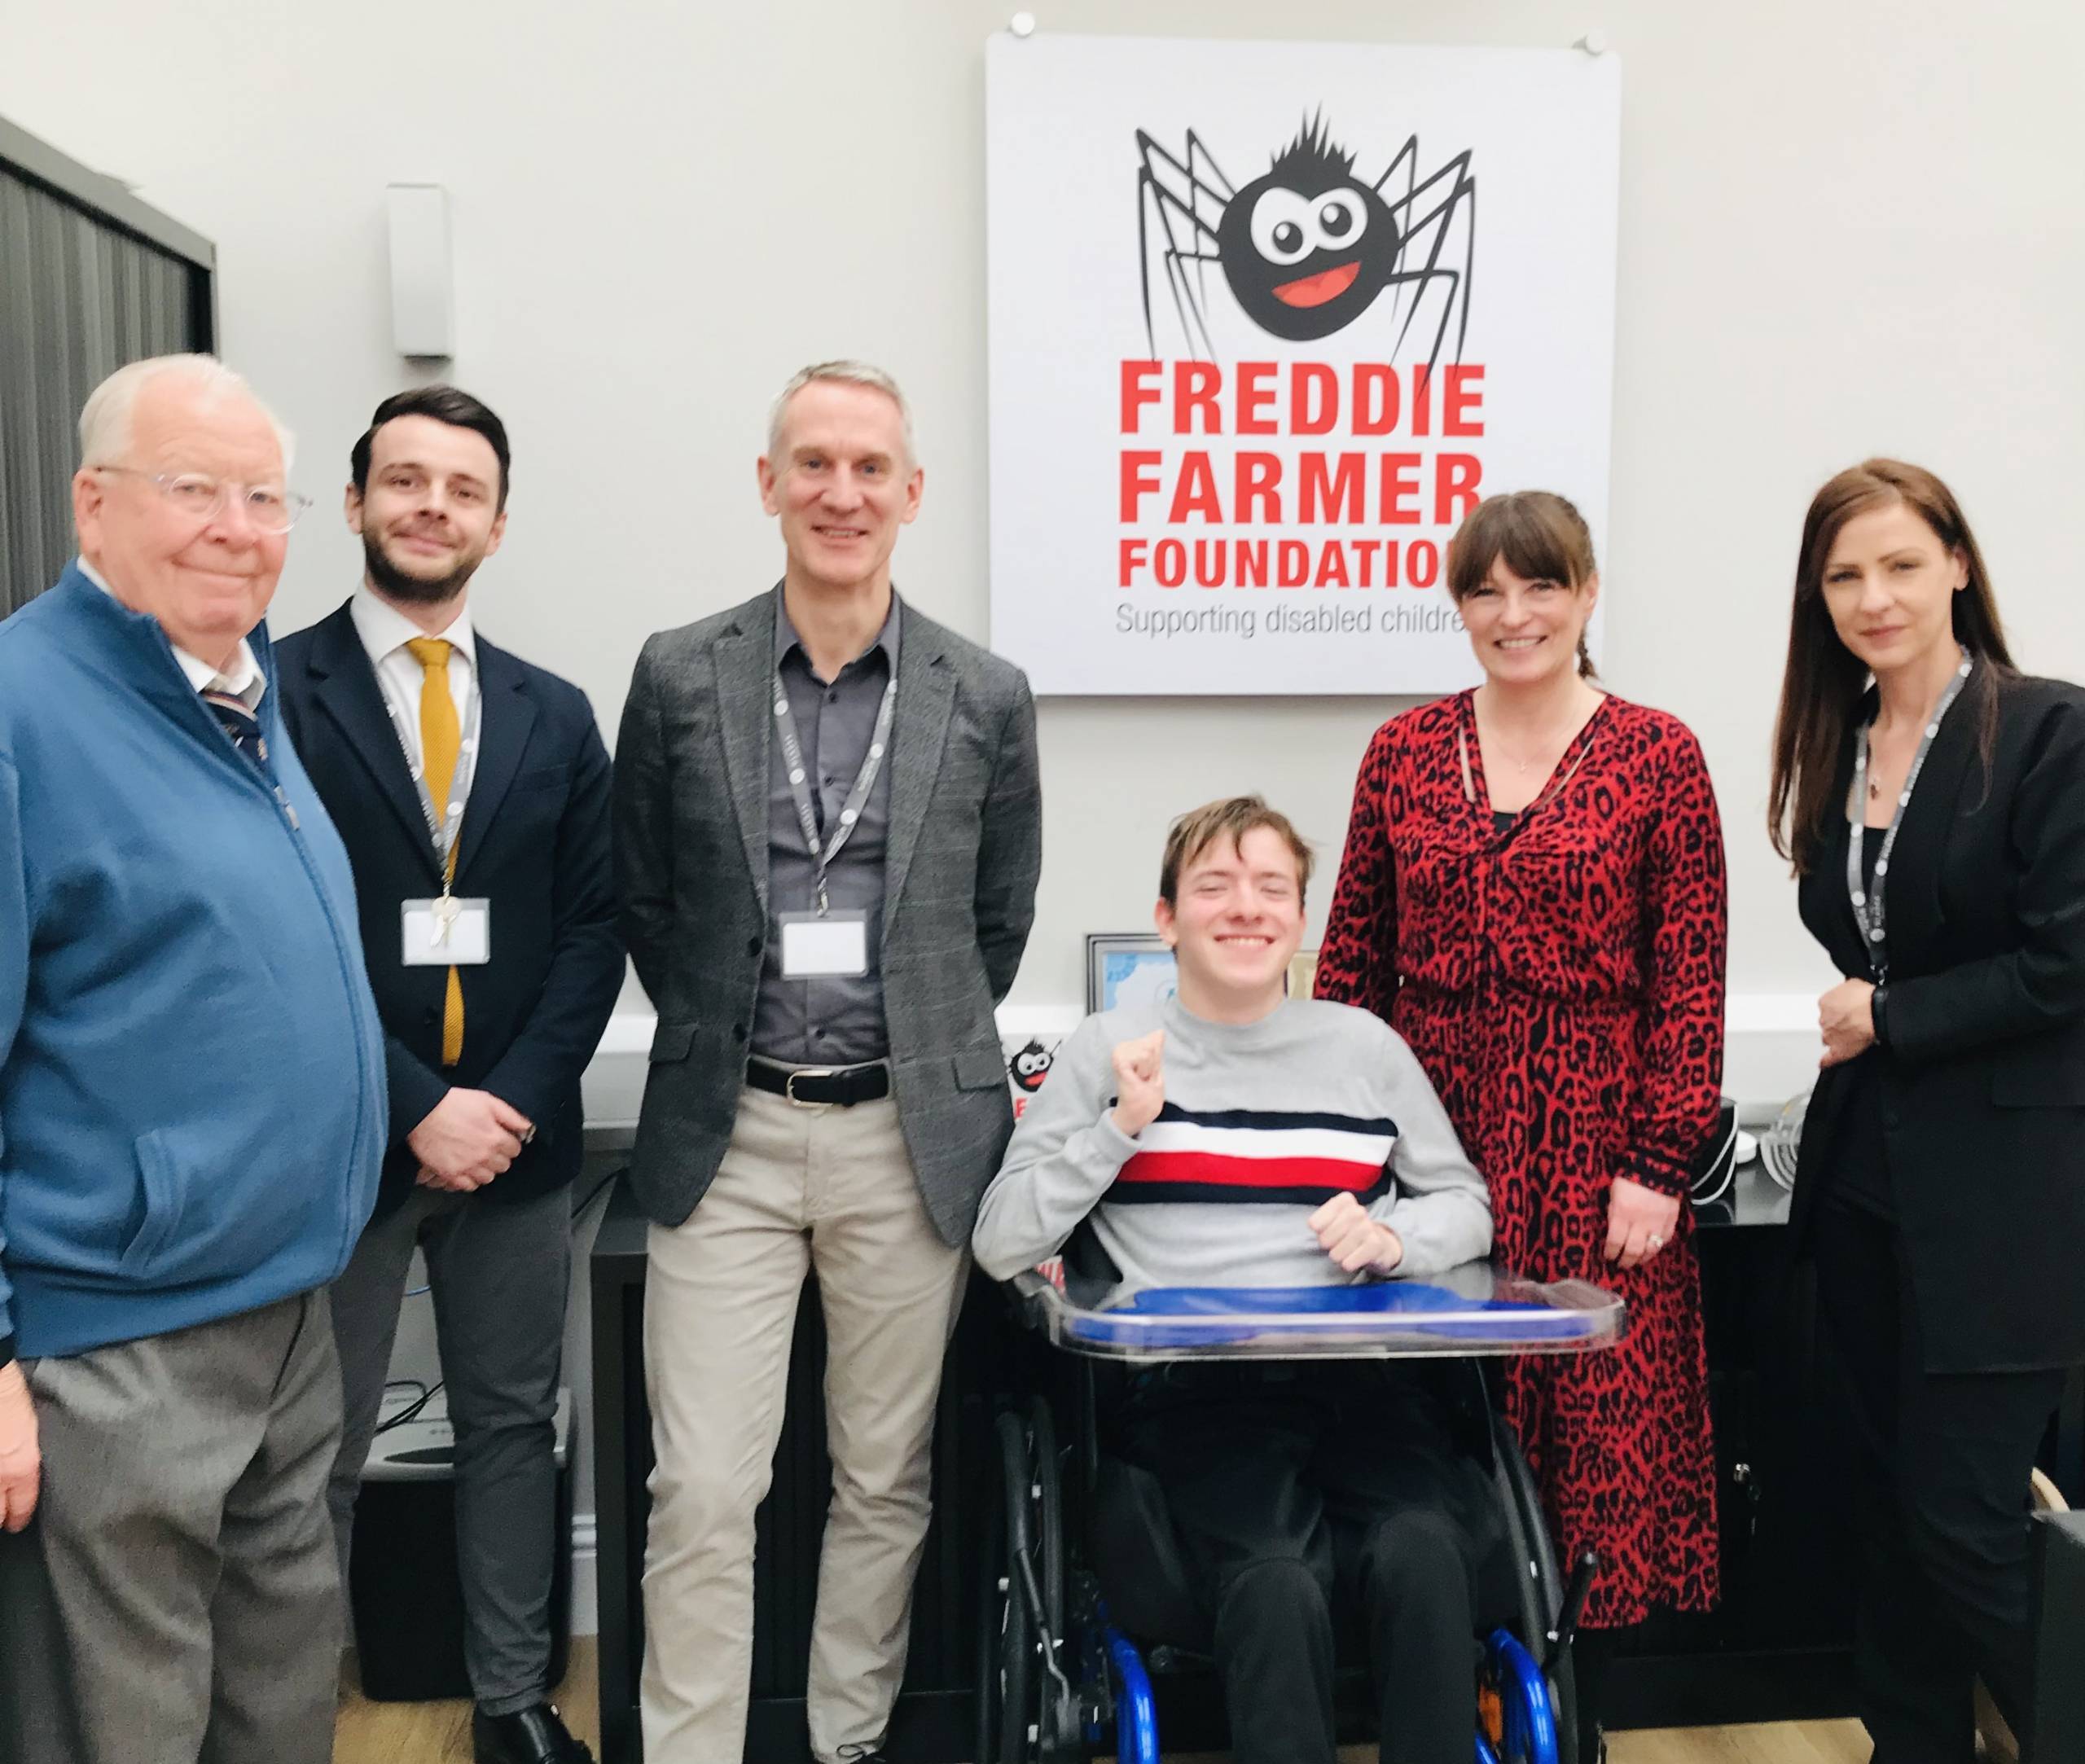 Freddie Farmer Foundation in Bromley chosen as Glades Shopping Centre’s Charity of the Year